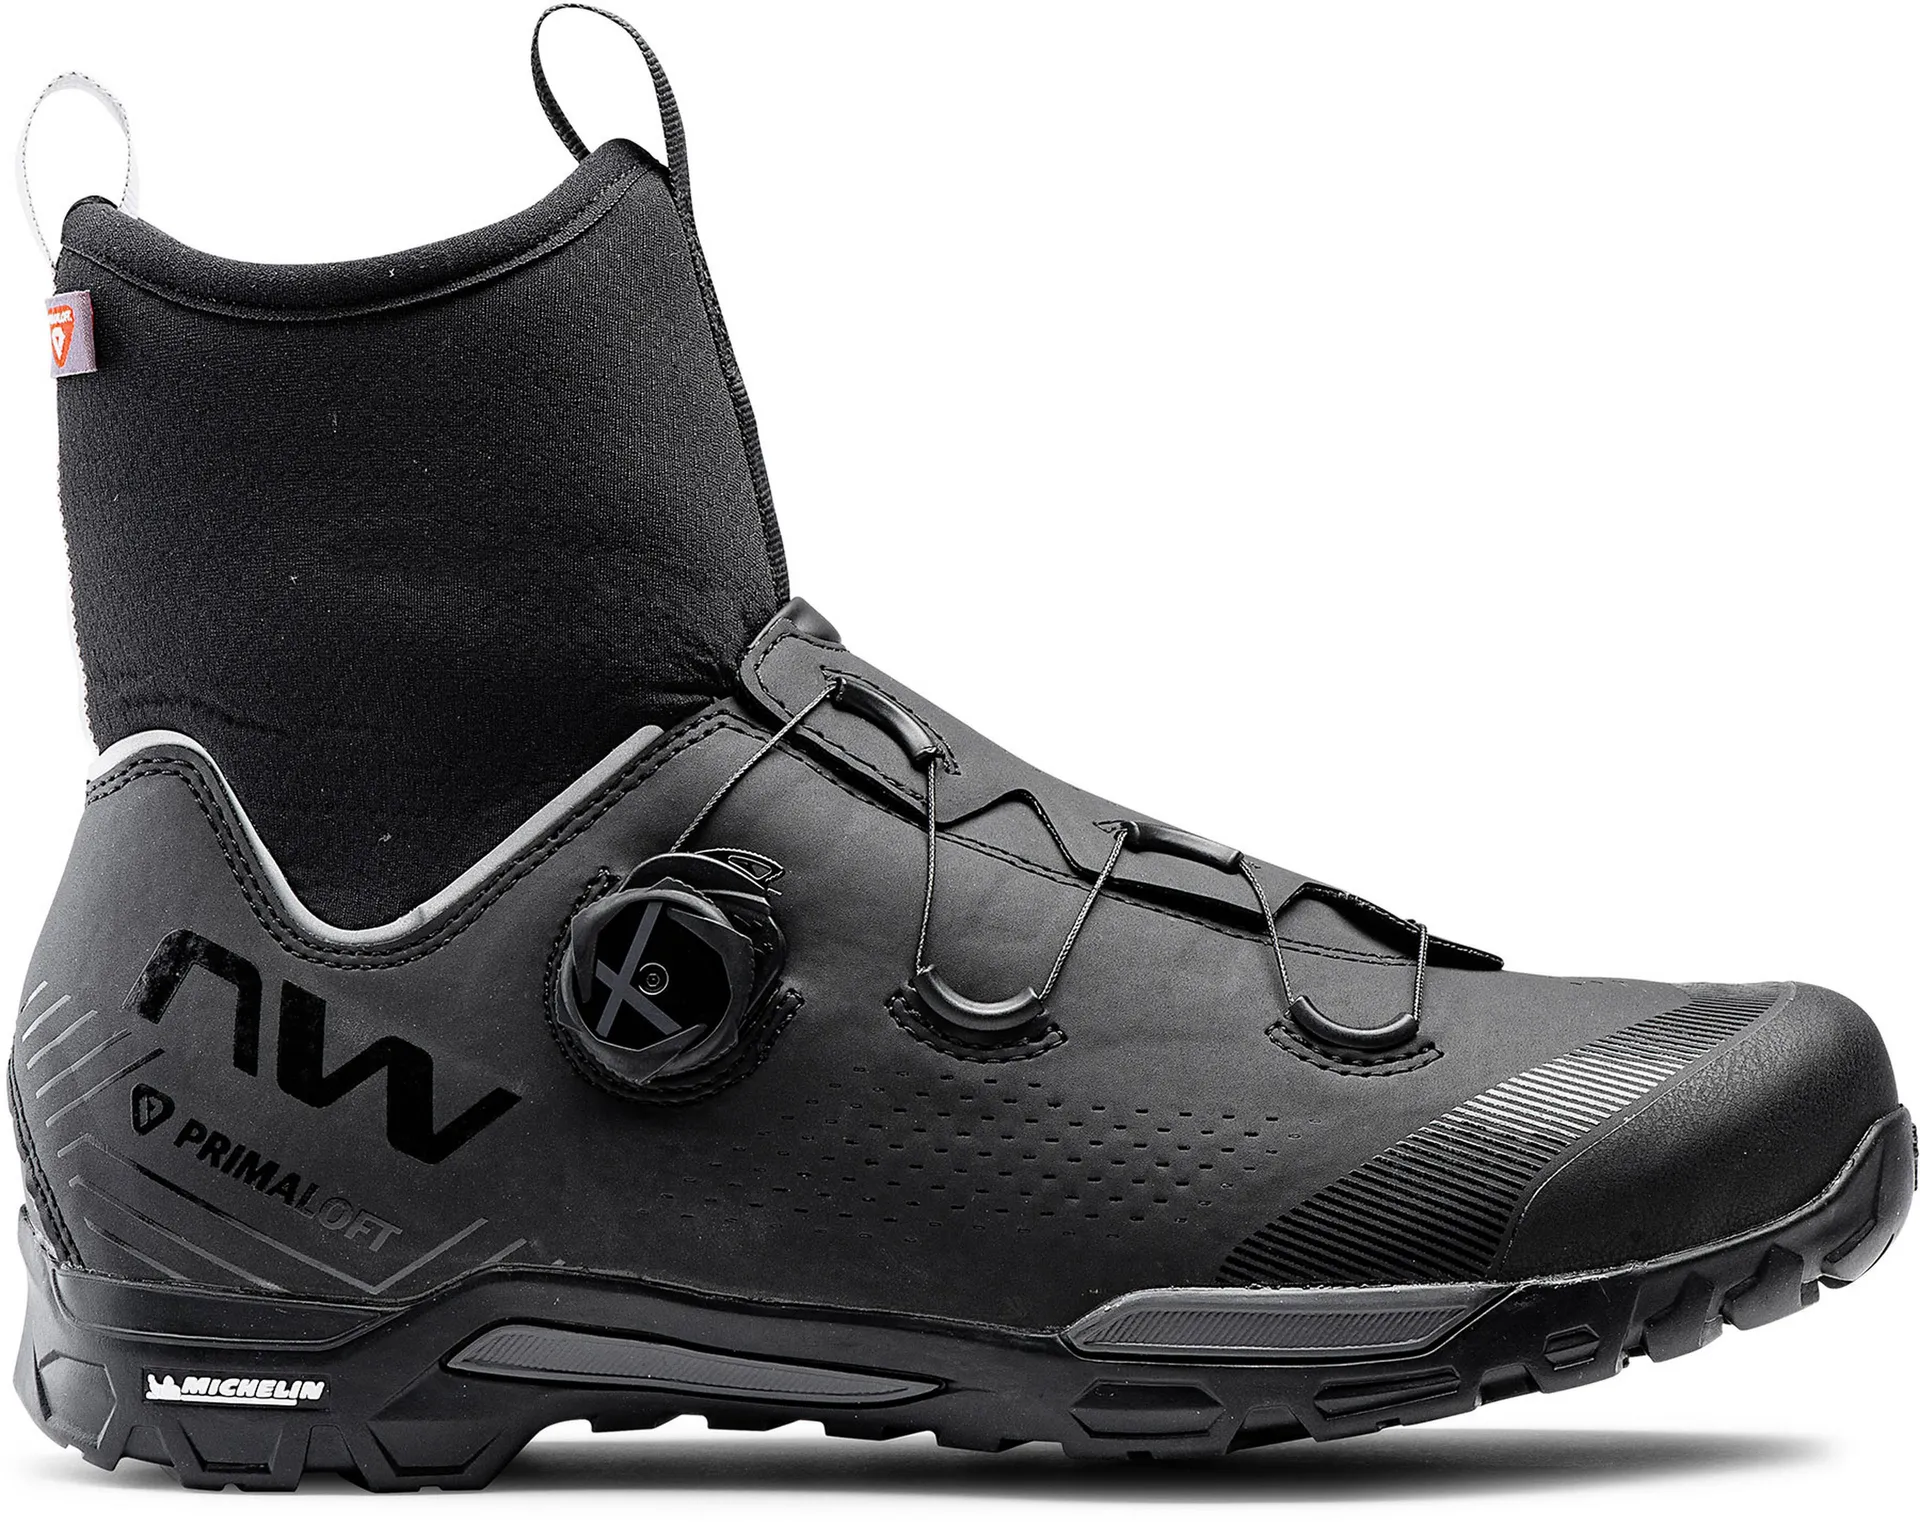 Northwave X-Magma Core Winter Boots